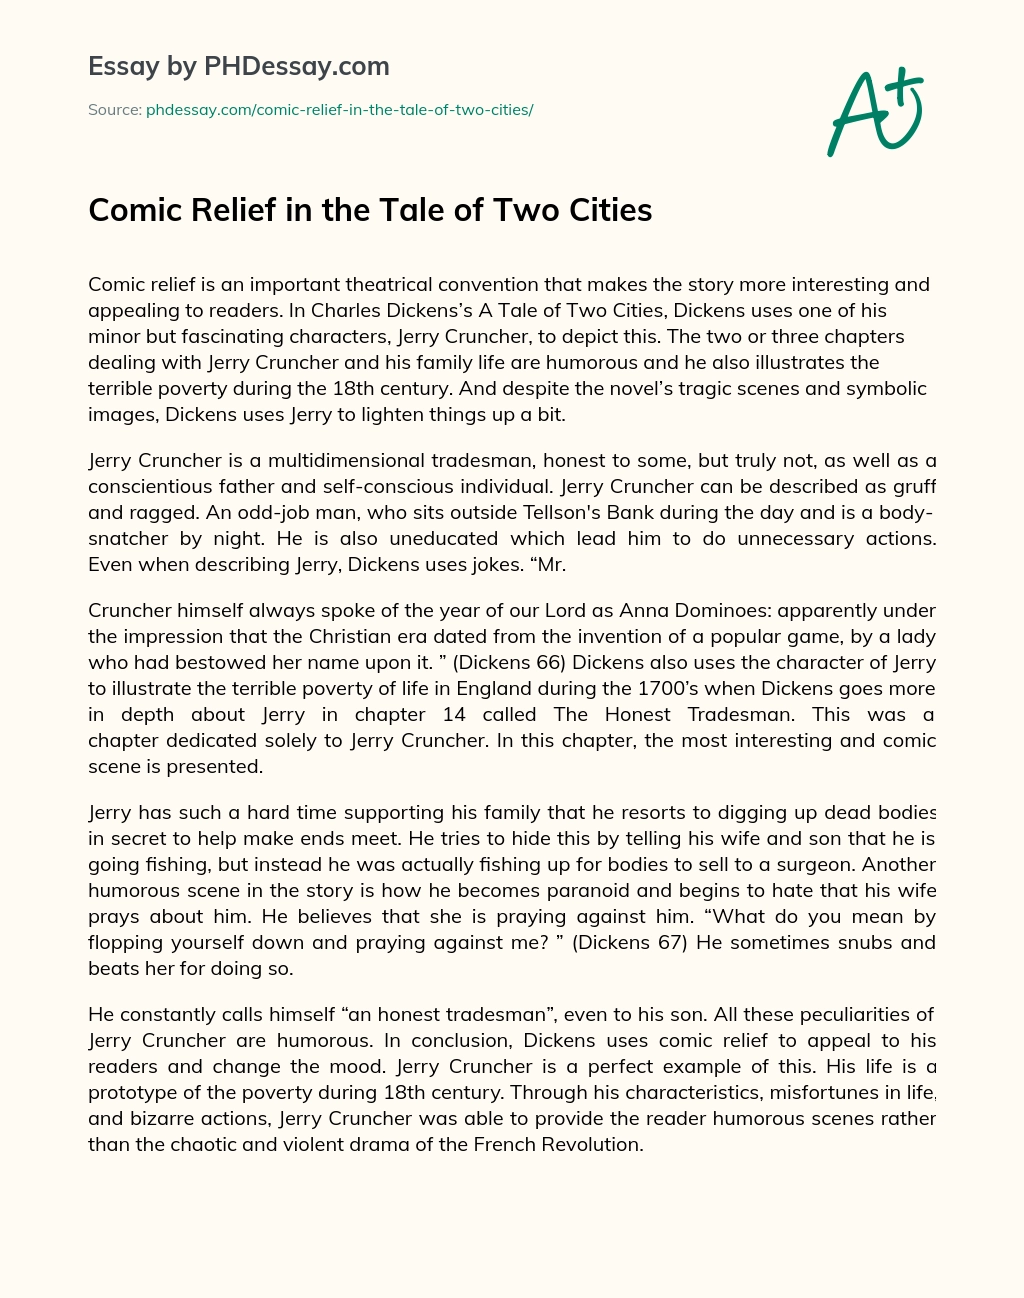 Comic Relief in the Tale of Two Cities essay